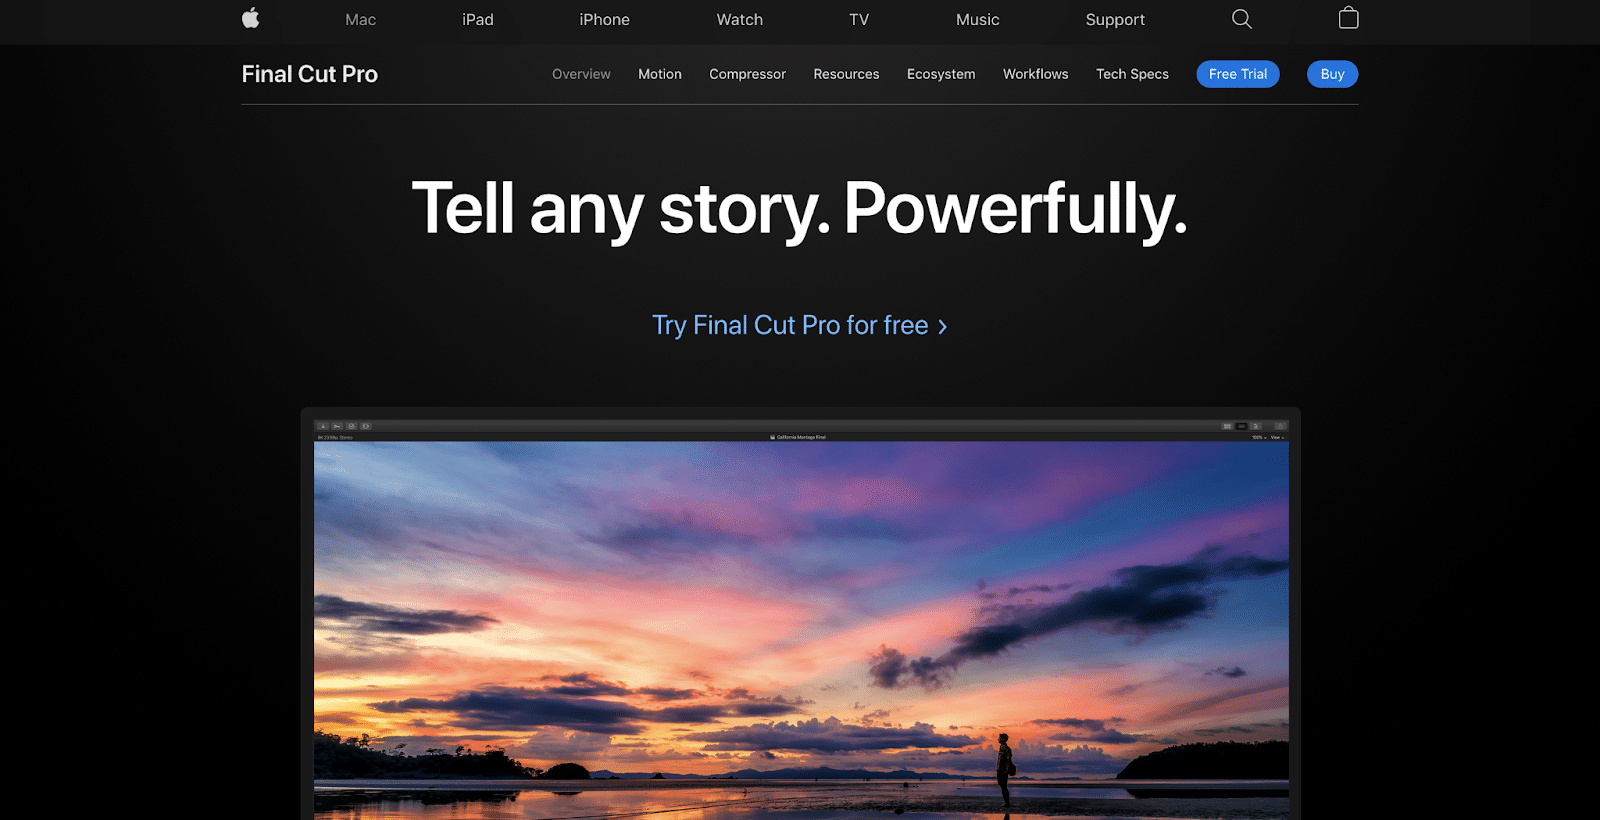 Final Cut Pro enables editors to make high-quality videos in a fraction of the time.